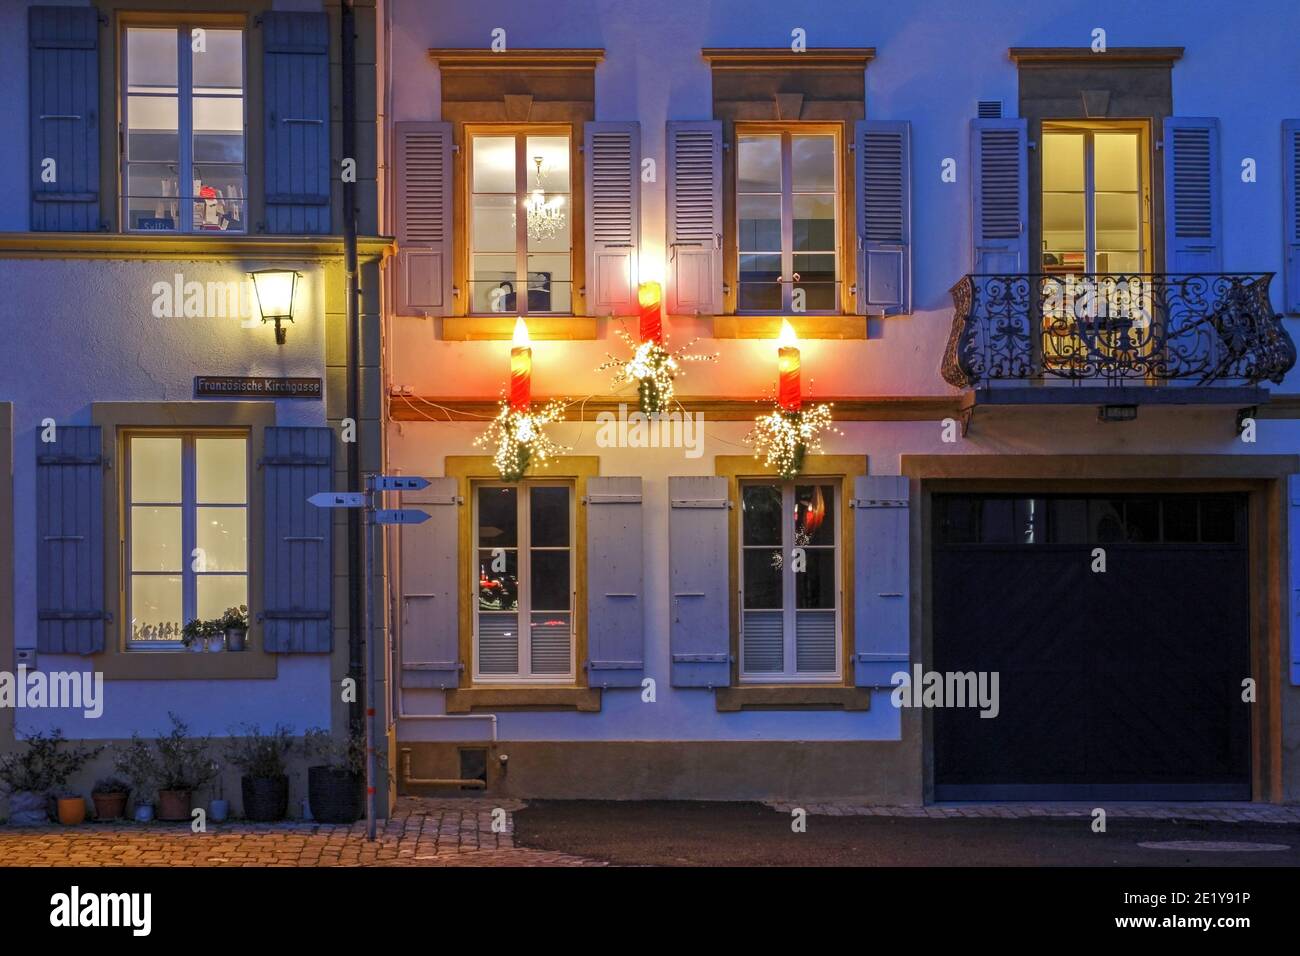 Three candle like illumination adorn the facade of a beautiful historic house in Murten (or Morat in French) in Fribourg Canton of Switzerland during Stock Photo